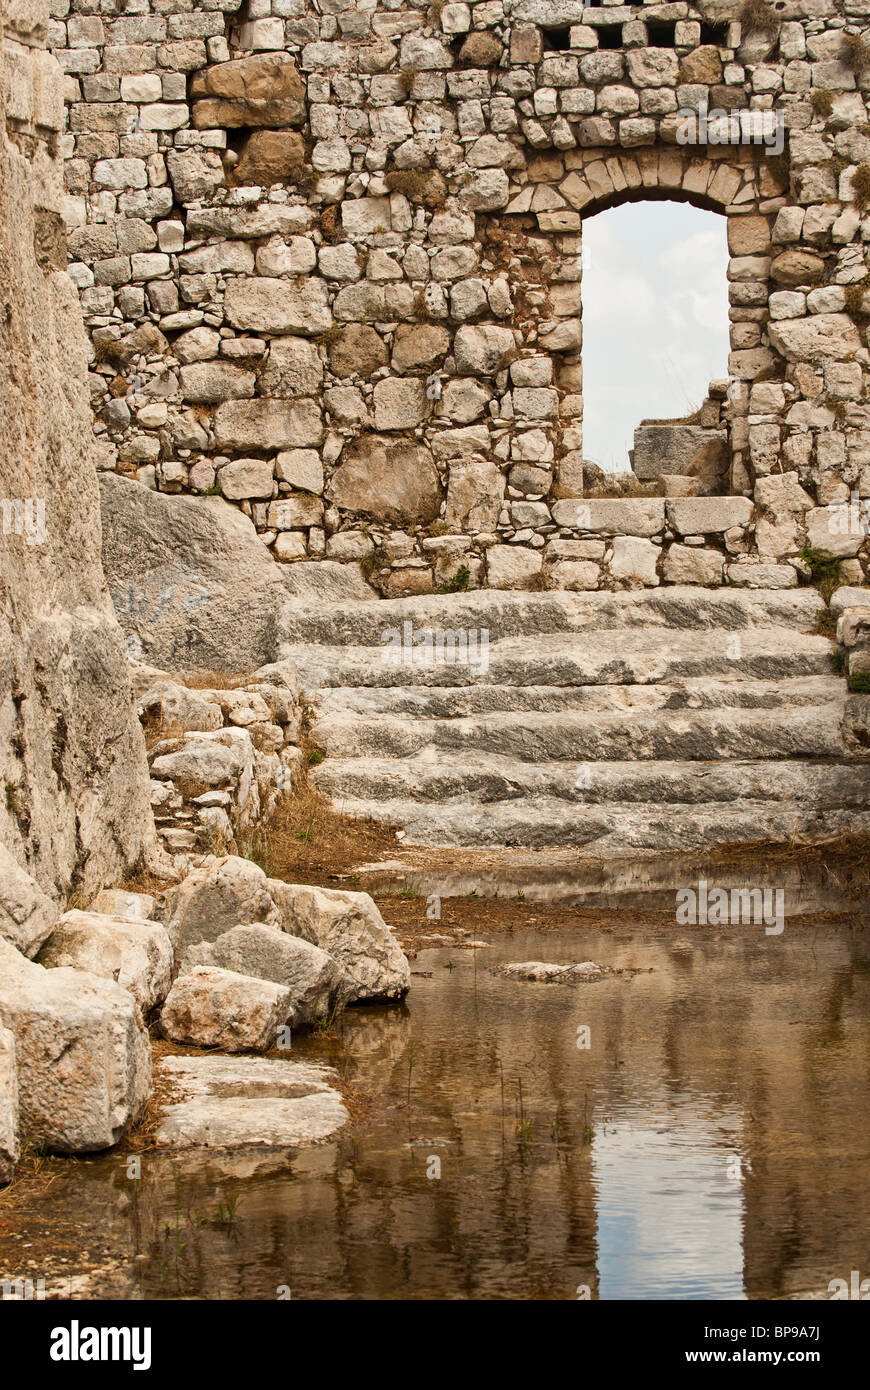 CLoseup of a destroyed house in Lebanon Middle east Stock Photo